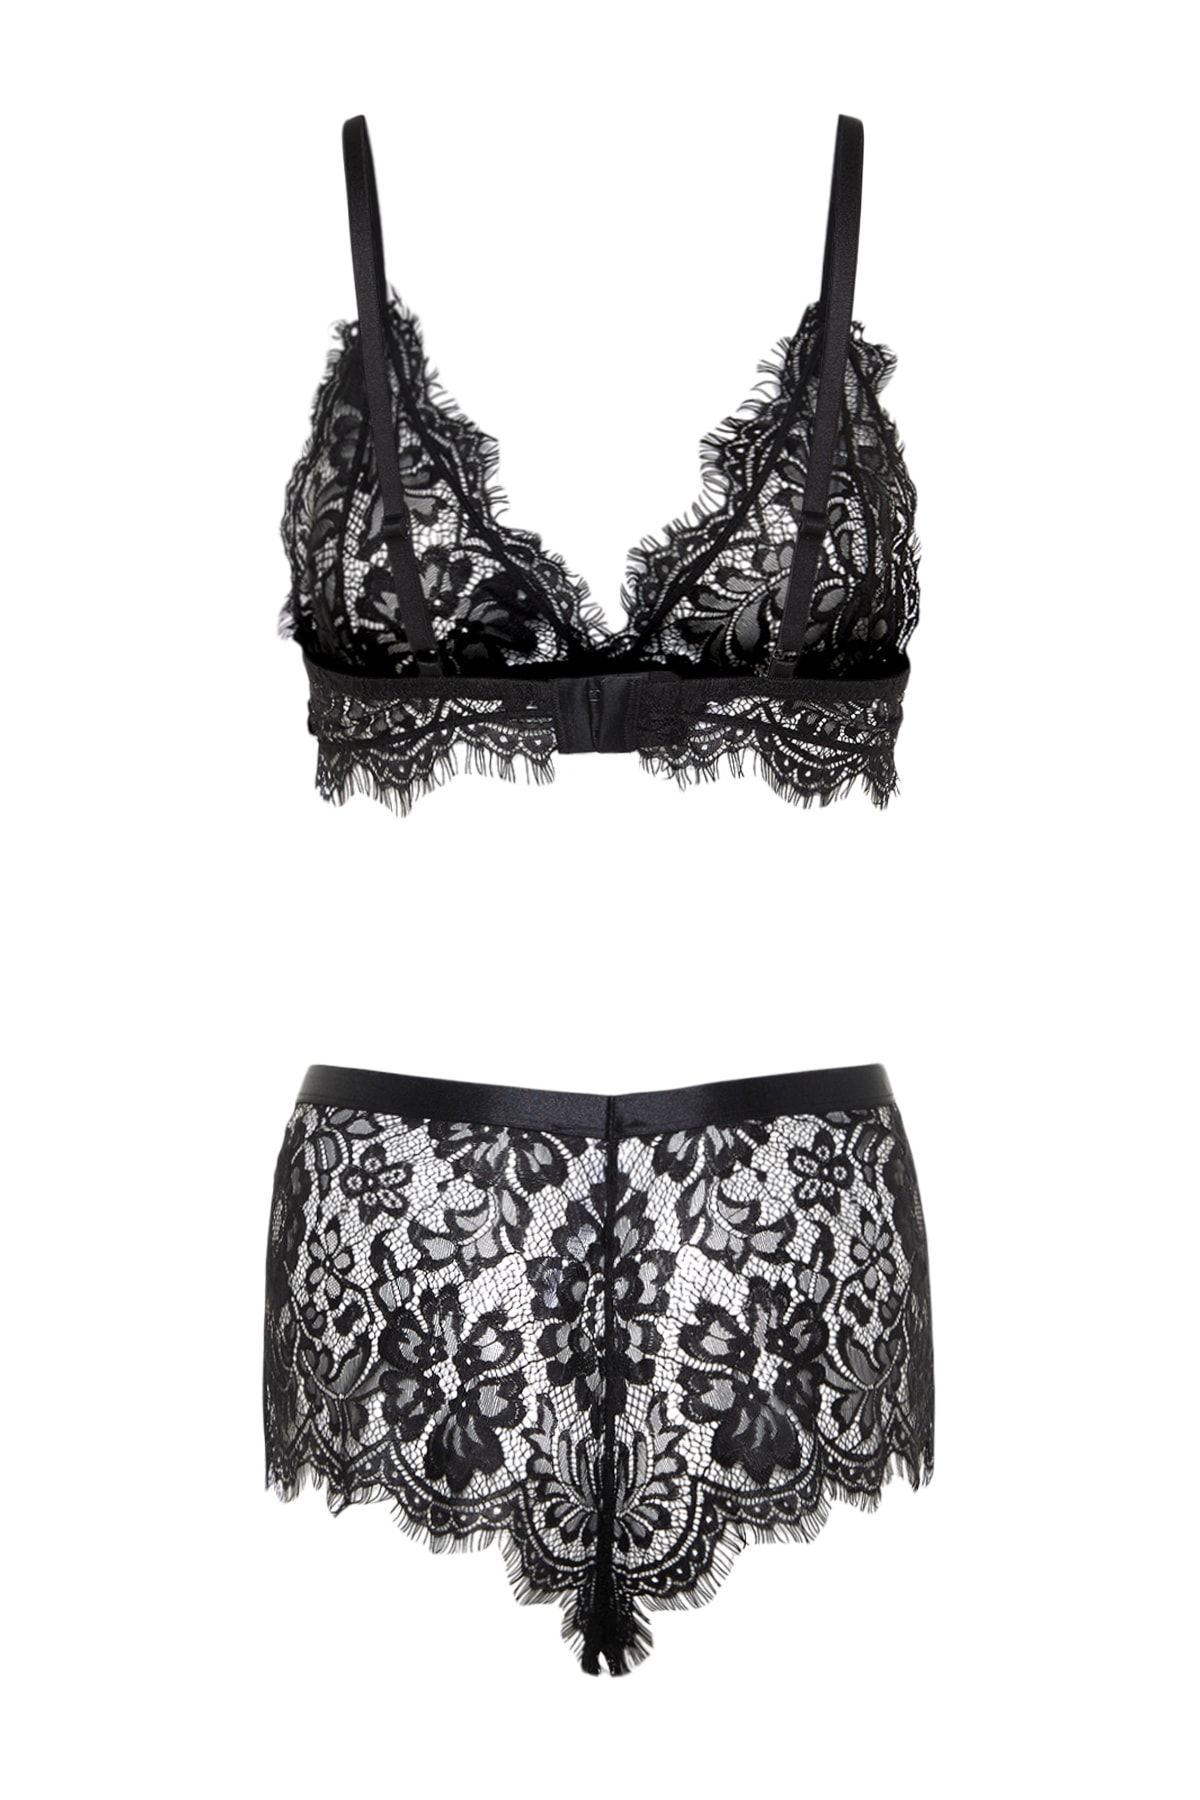 Trendyol Collection Black Lace Cupless Lingerie Set with Removable